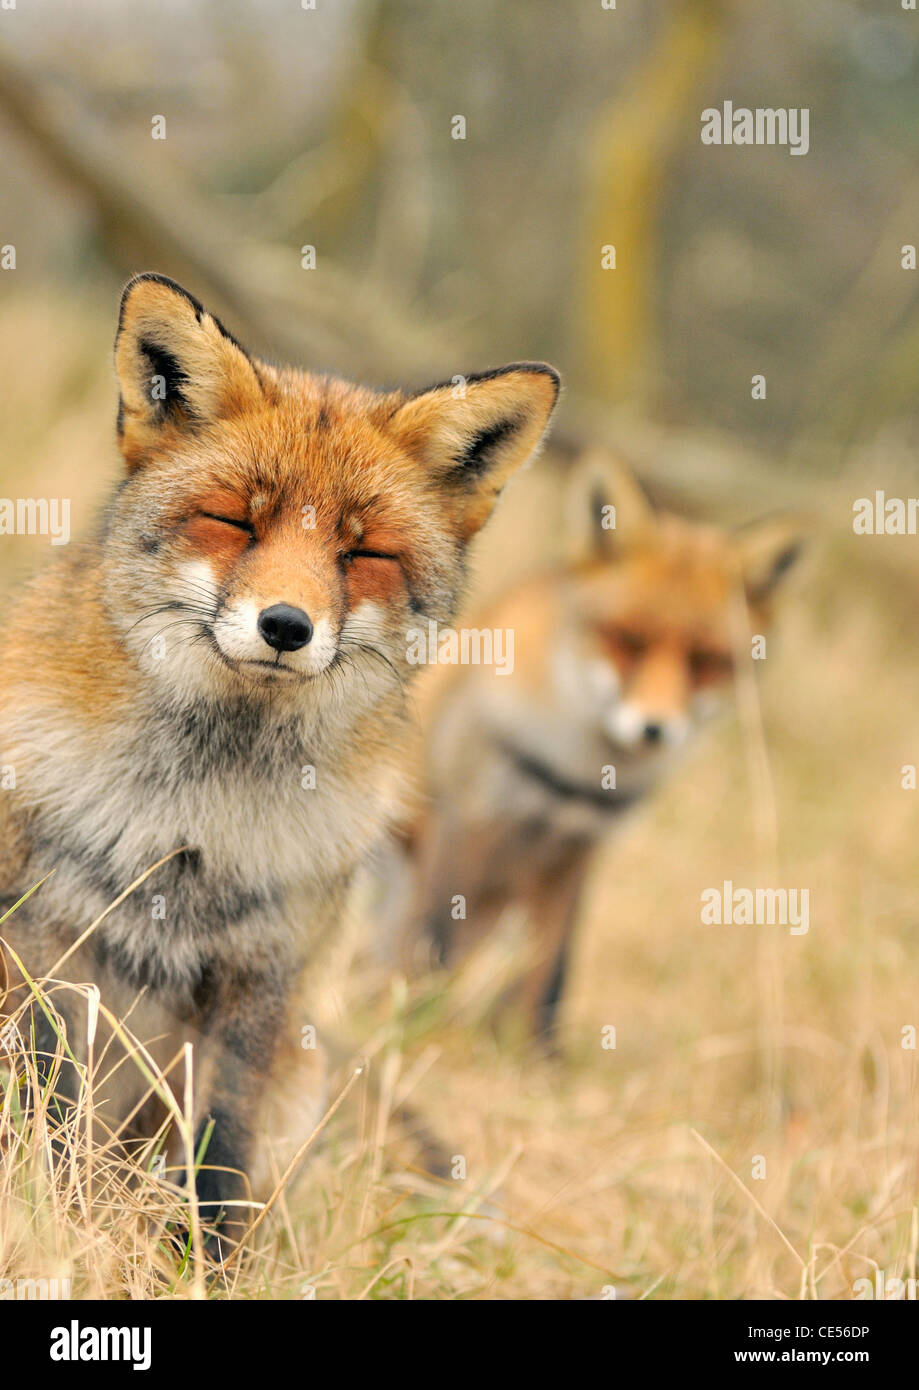 Two Red foxes (Vulpes vulpes) sitting with eyes closed Stock Photo